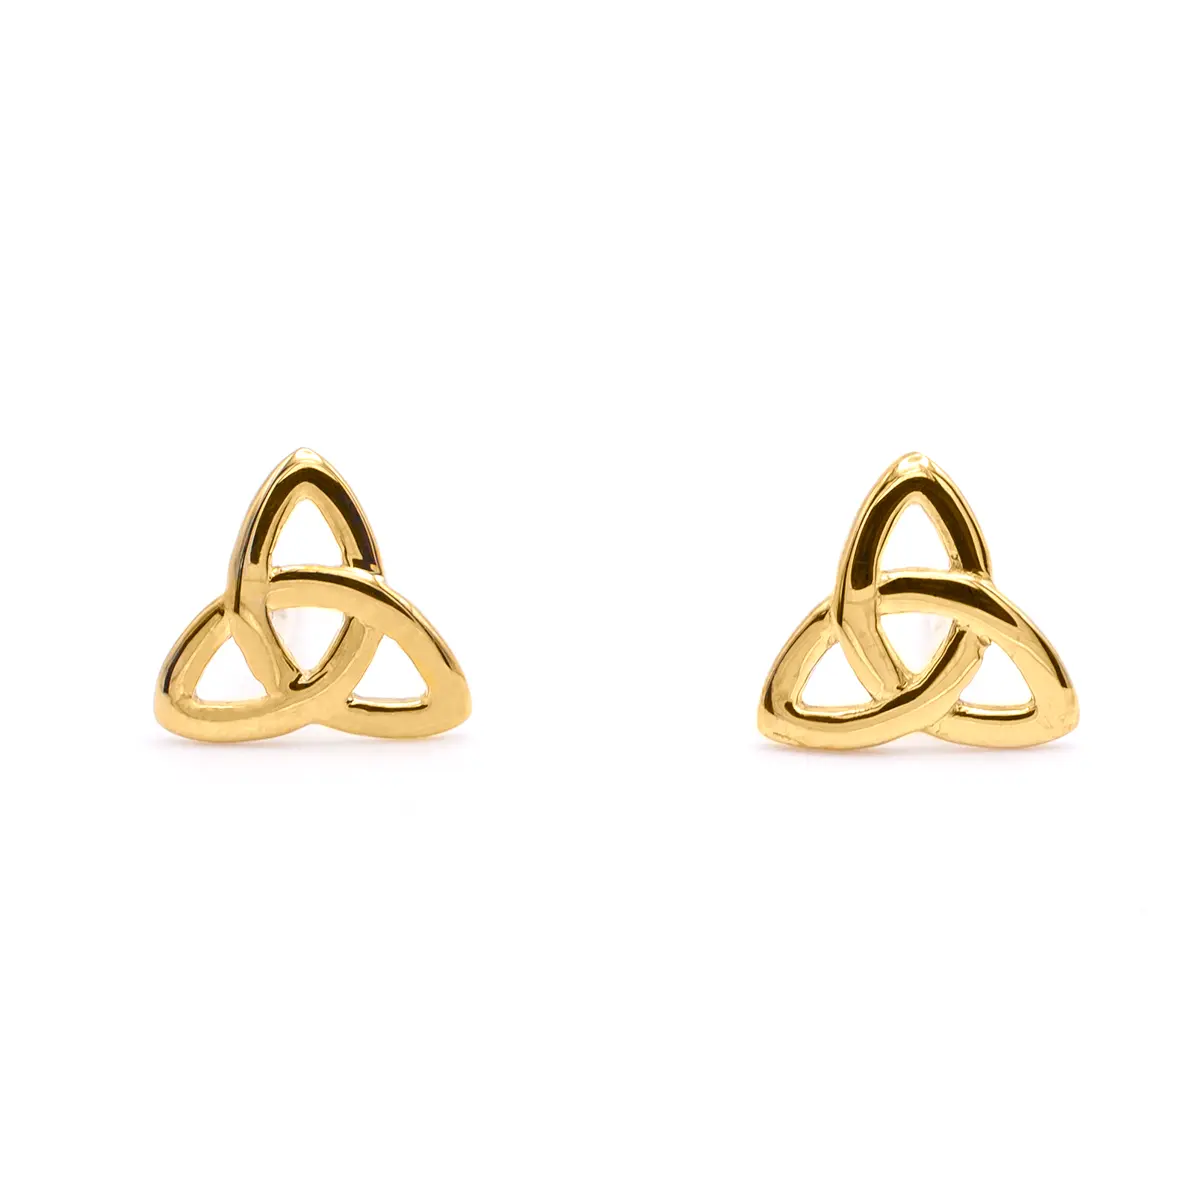 Product Review 9k Gold Celtic Trinity Knot Small Stud Earrings